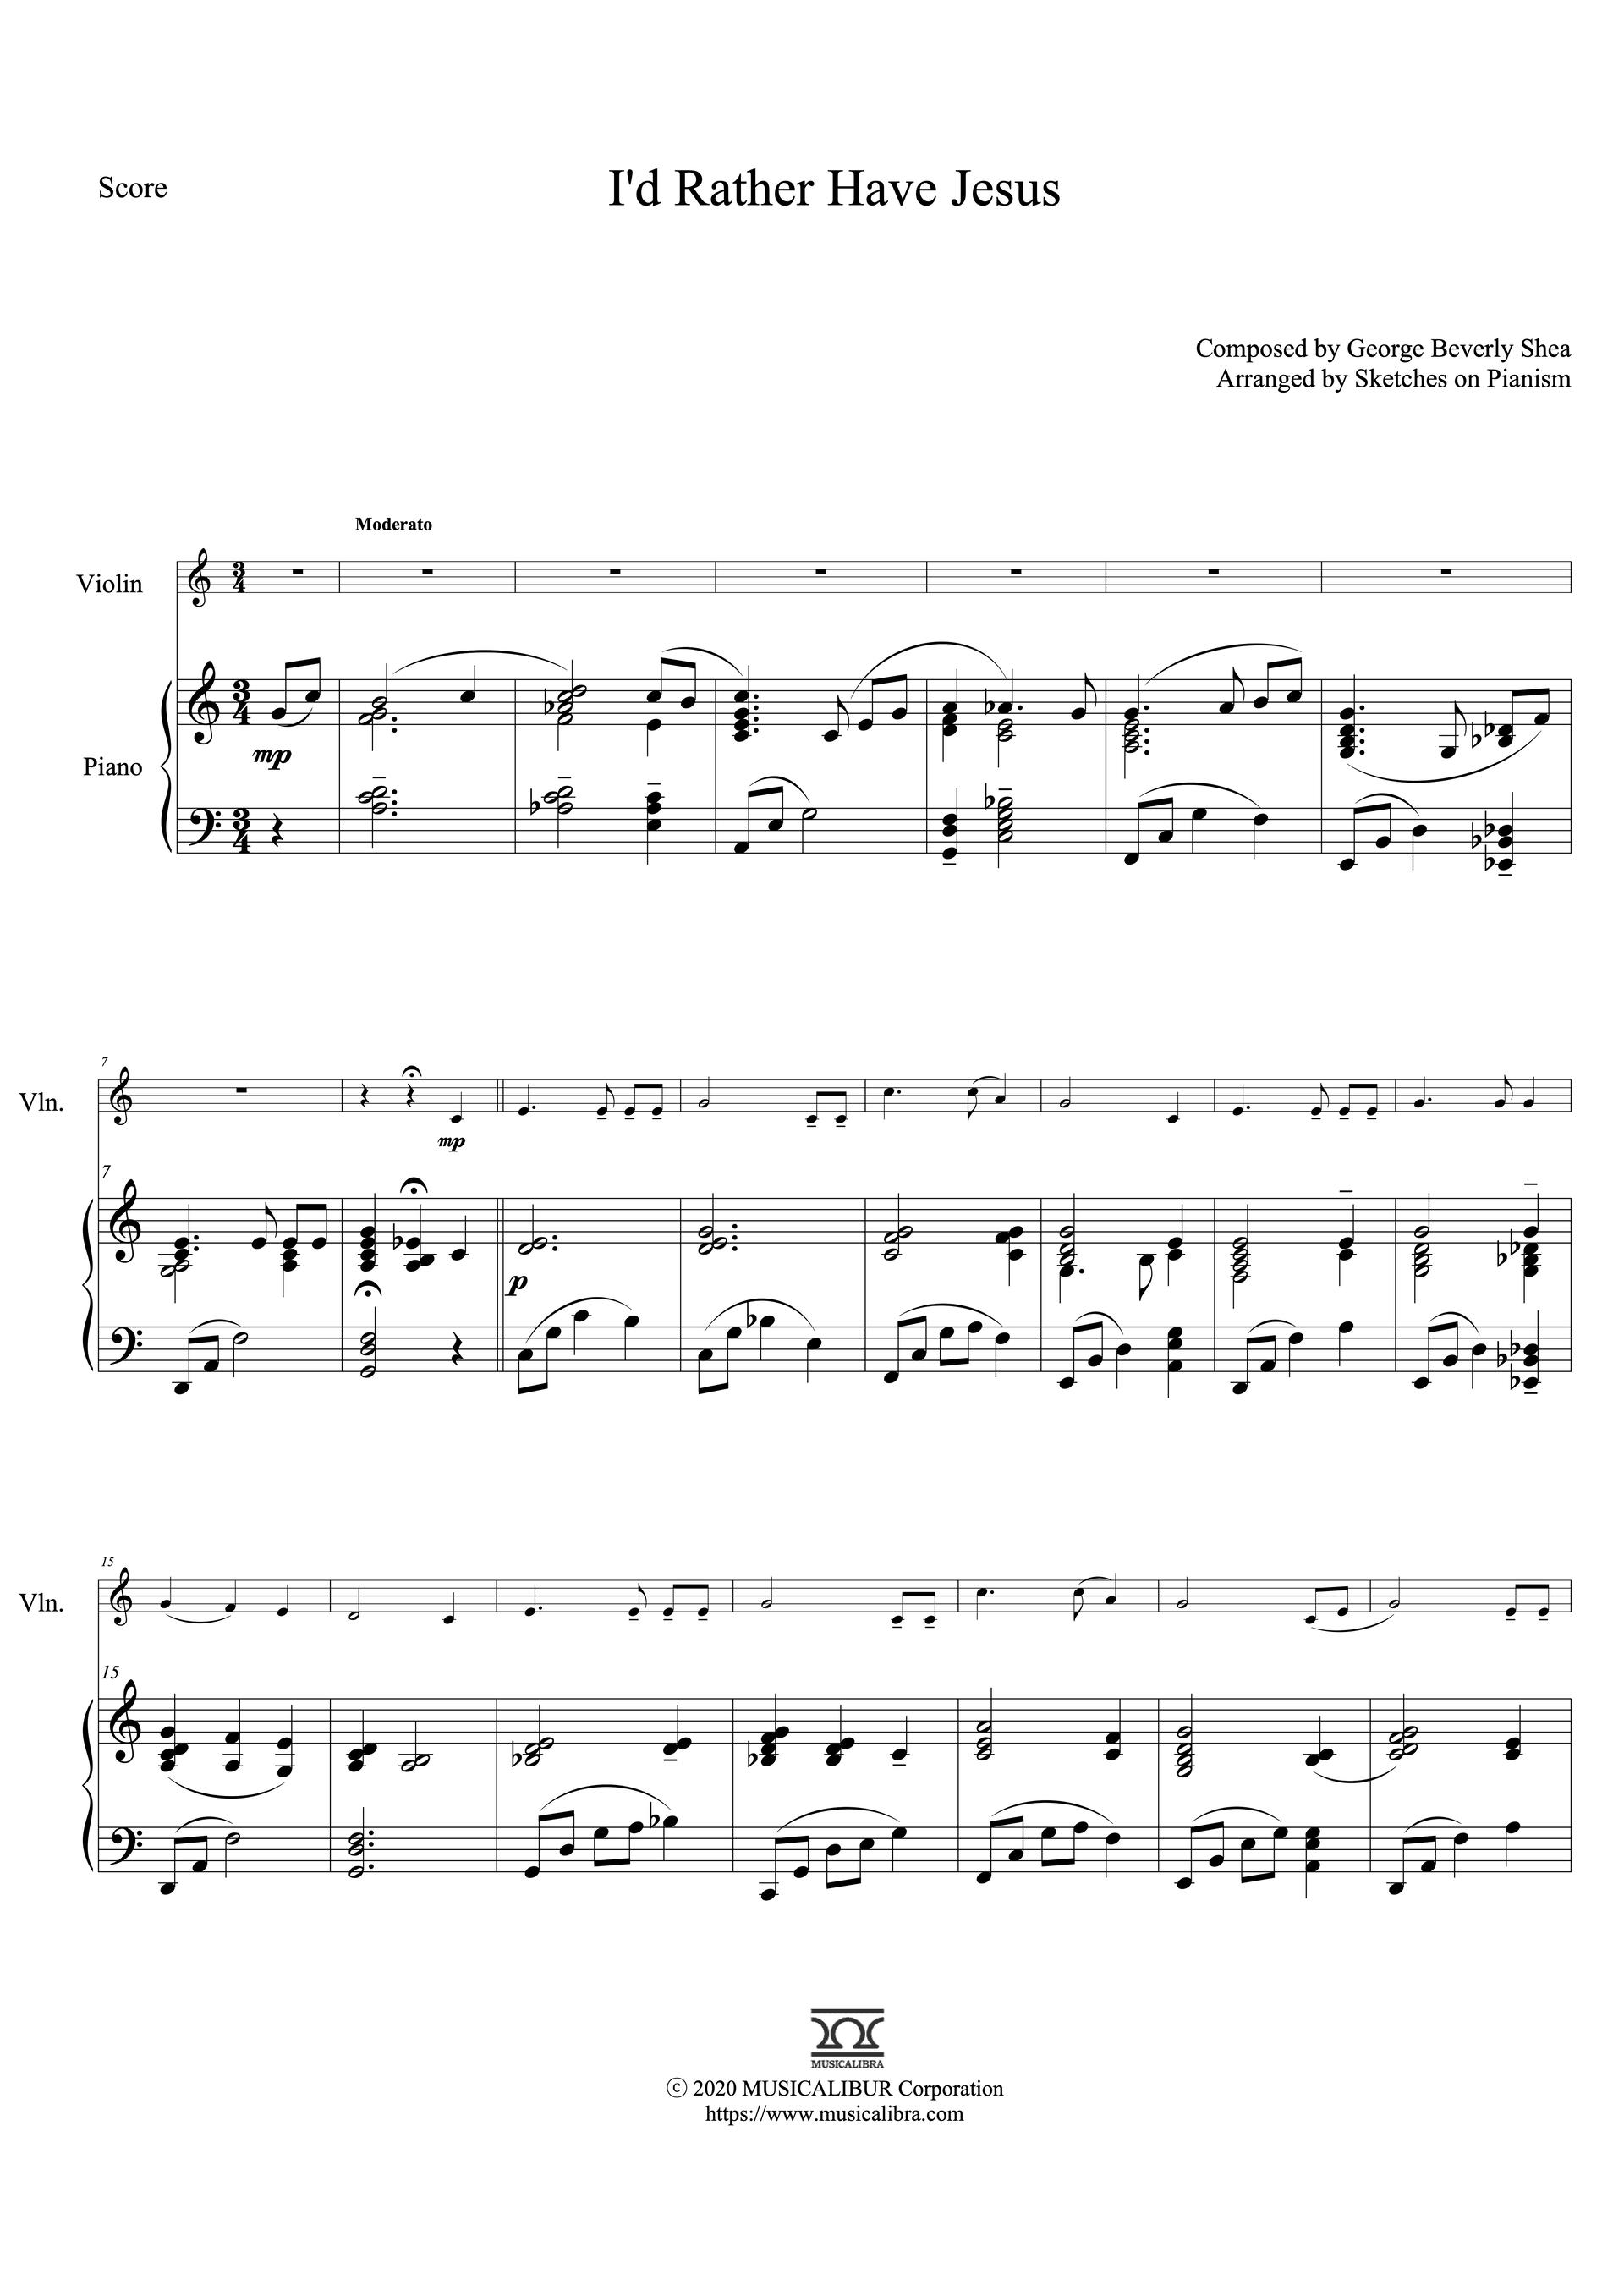 Sheet music of I'd Rather Have Jesus arranged for violin and piano duet preview page 1